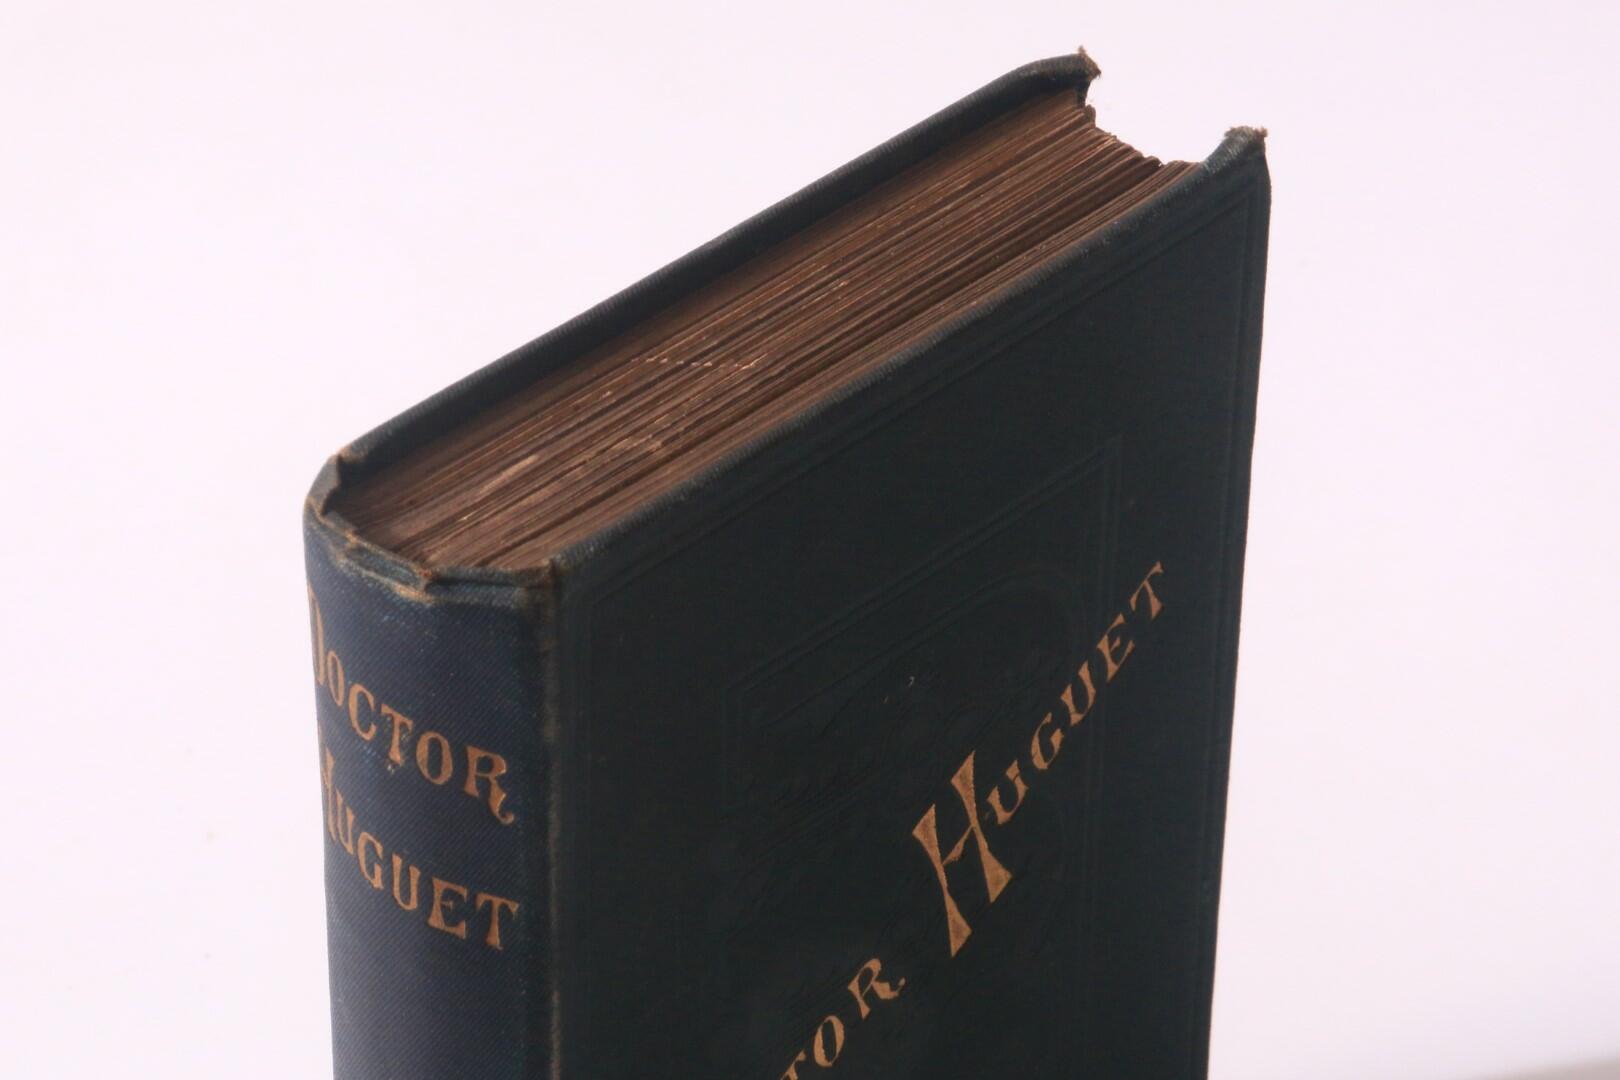 Ignatius Donnelly - Doctor Huguet - Sampson Low, Marston & Co., 1892, First Edition.